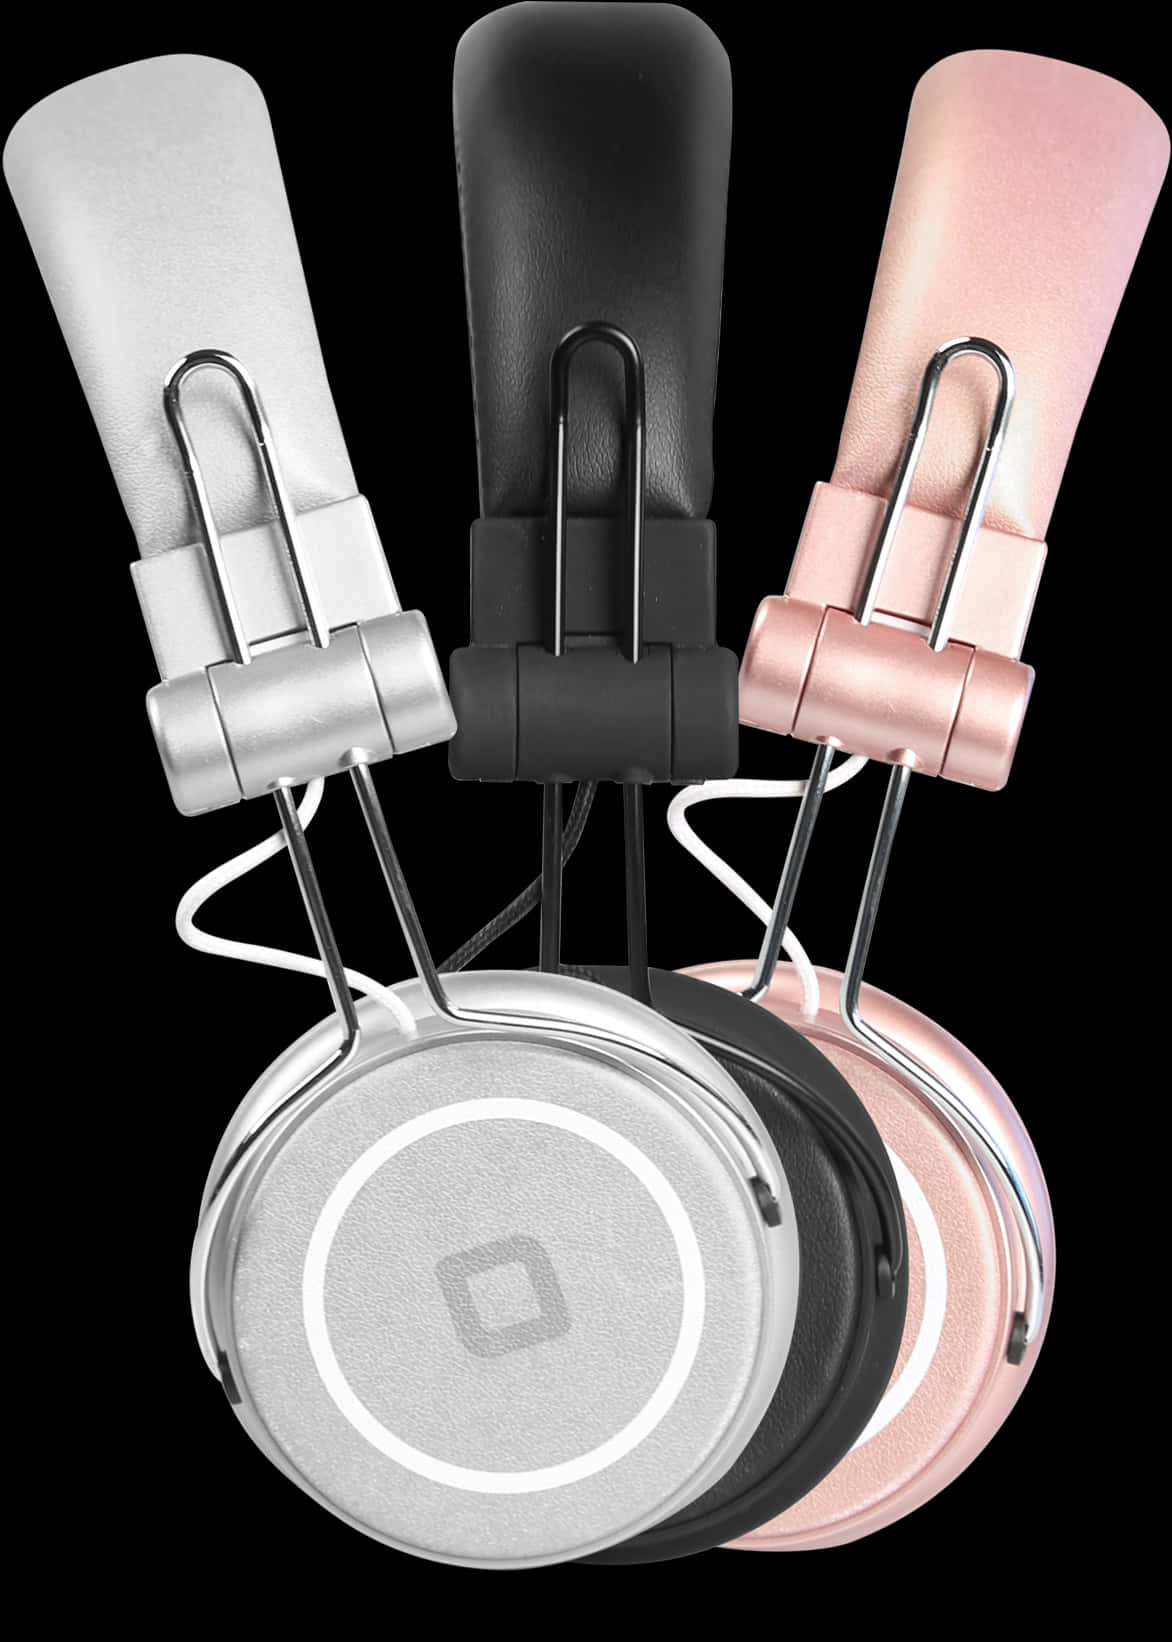 A Group Of Headphones With Leather Straps